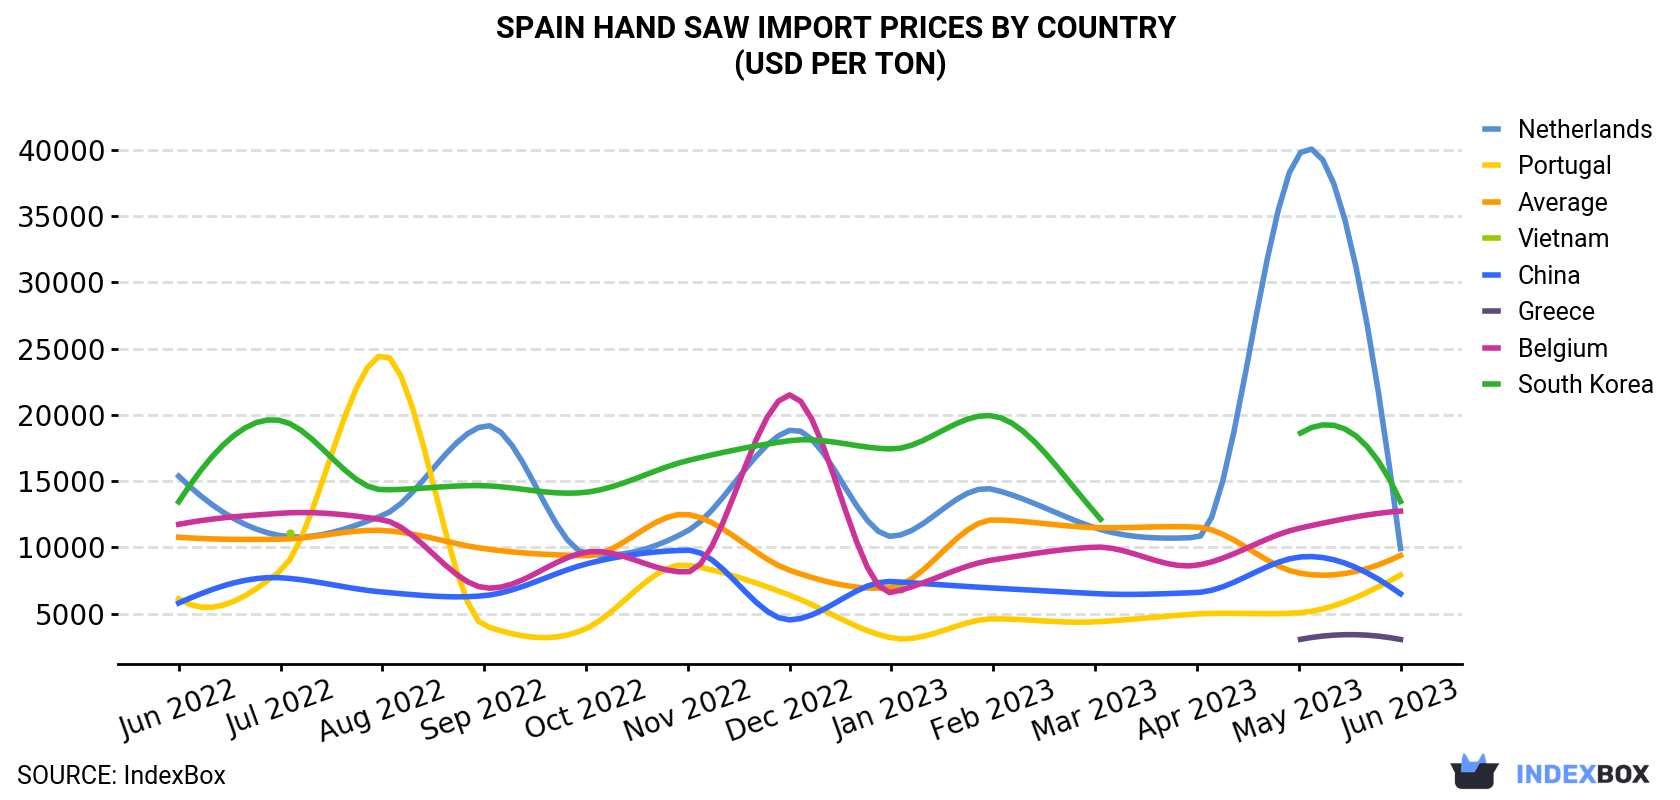 Spain Hand Saw Import Prices By Country (USD Per Ton)